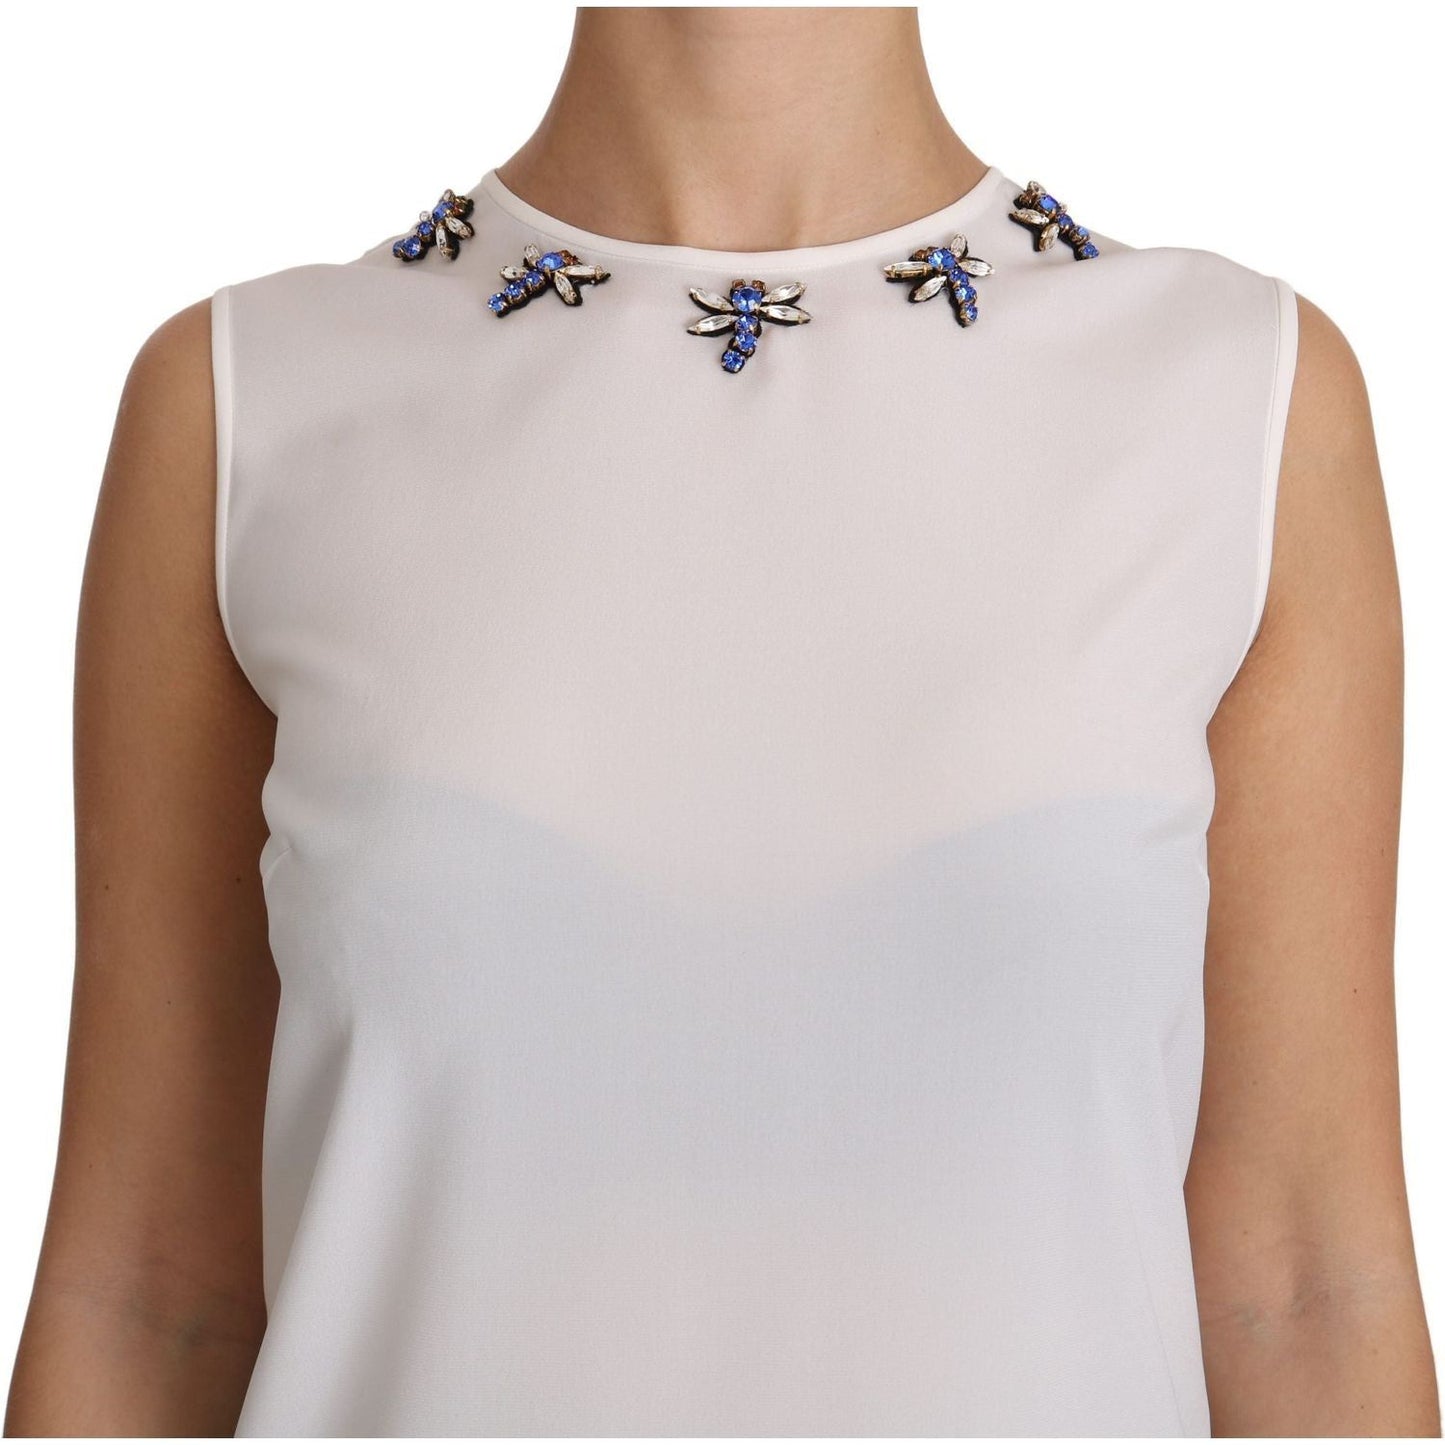 Dolce & Gabbana Fairy Tale Crystal-Embellished Silk Blouse white-silk-embellished-crystal-dragonfly-top